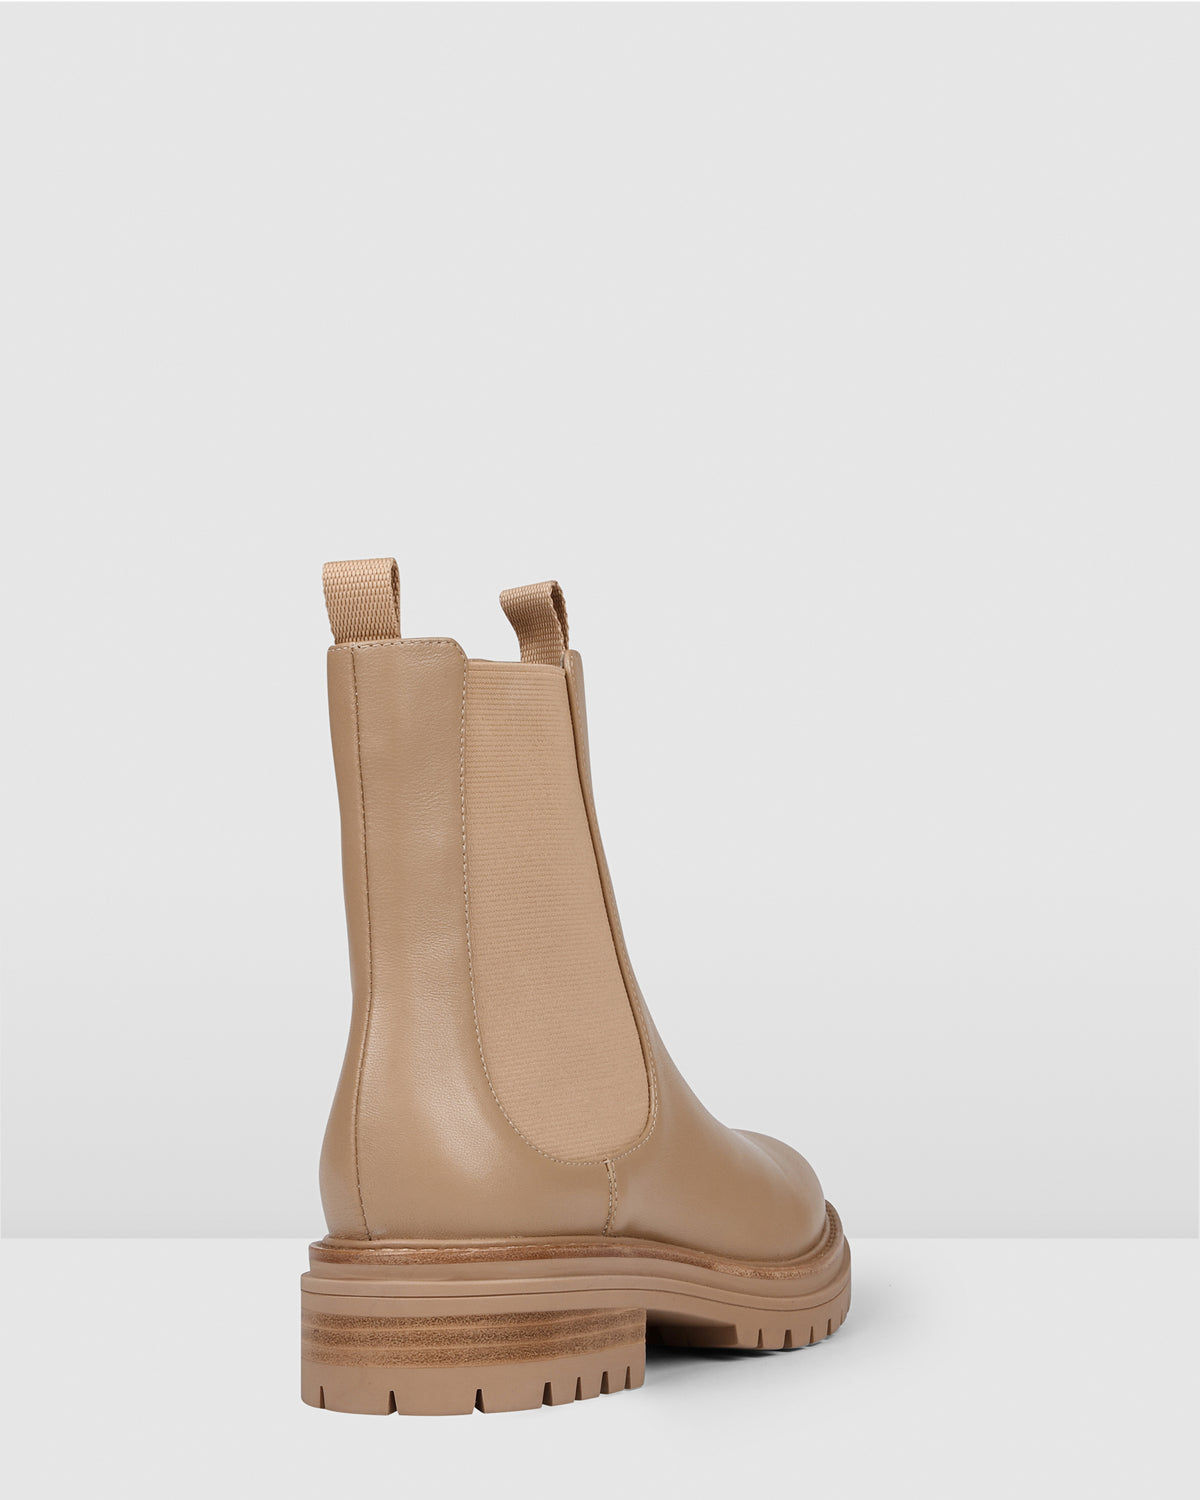 BLOOM FLAT ANKLE BOOTS BEIGE LEATHER